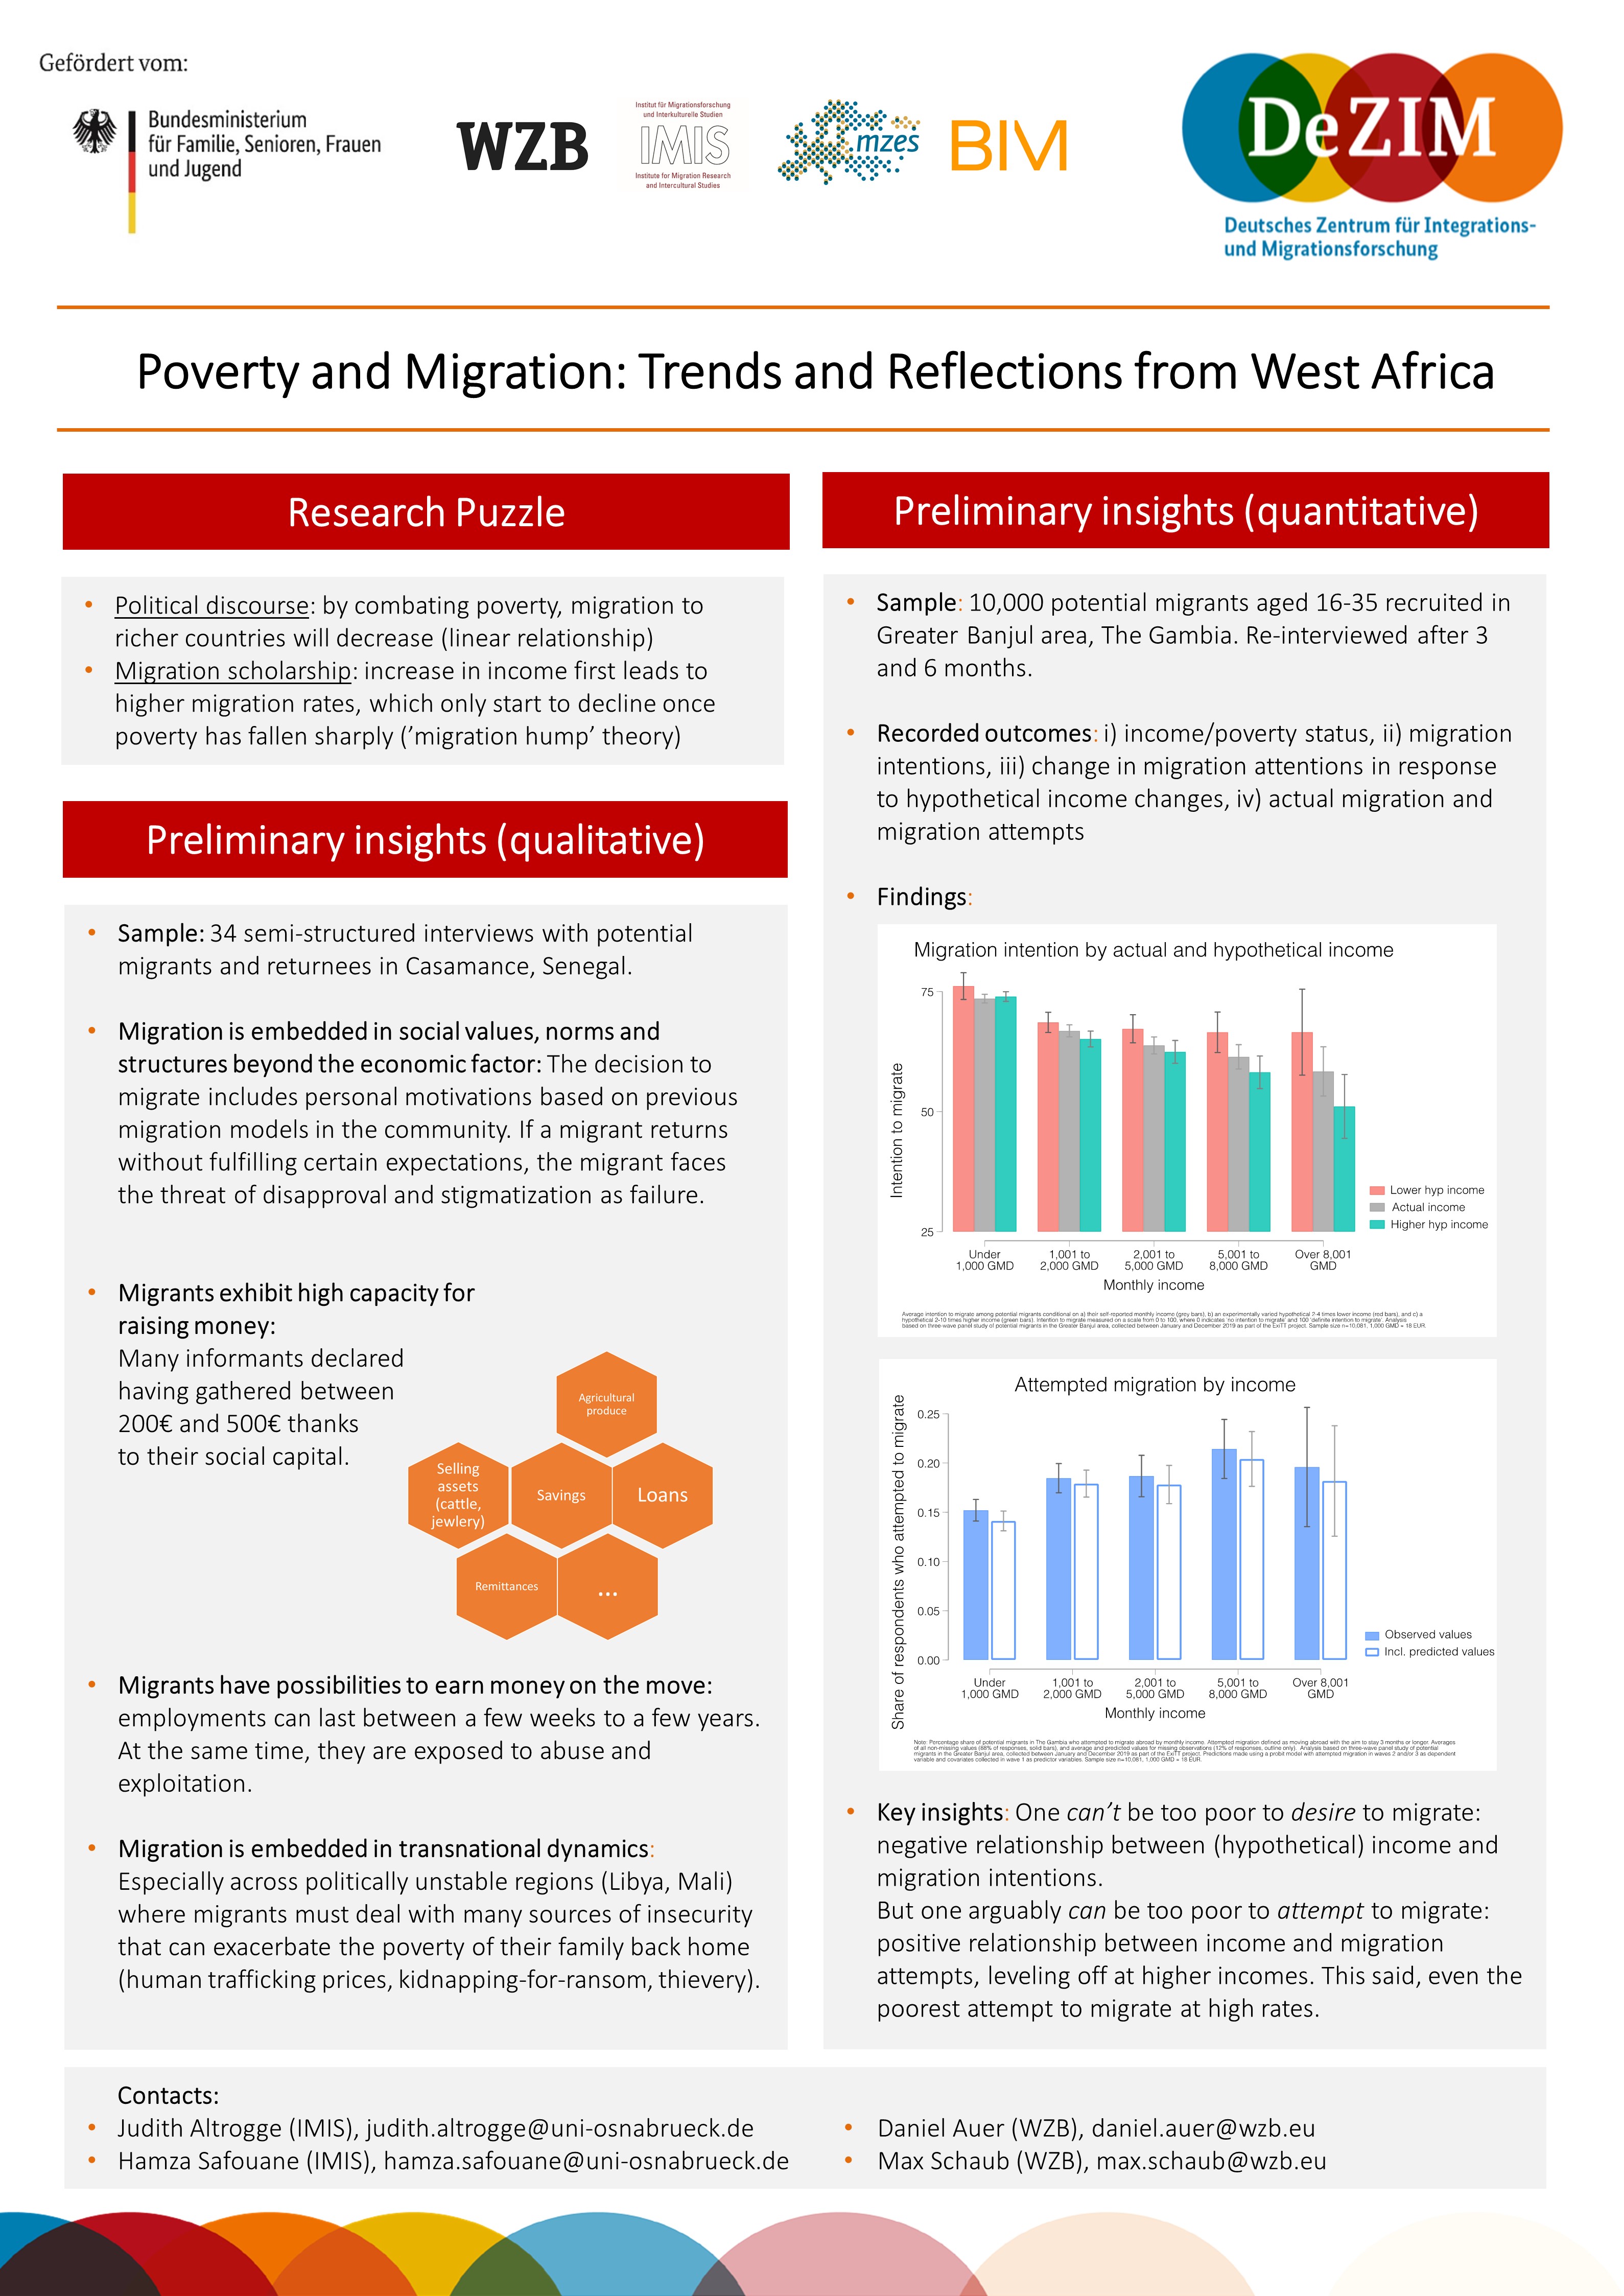 Presentation of results on the topic of poverty and migration at the closing conference of the pilot project ExiTT, December 2019 in Berlin.